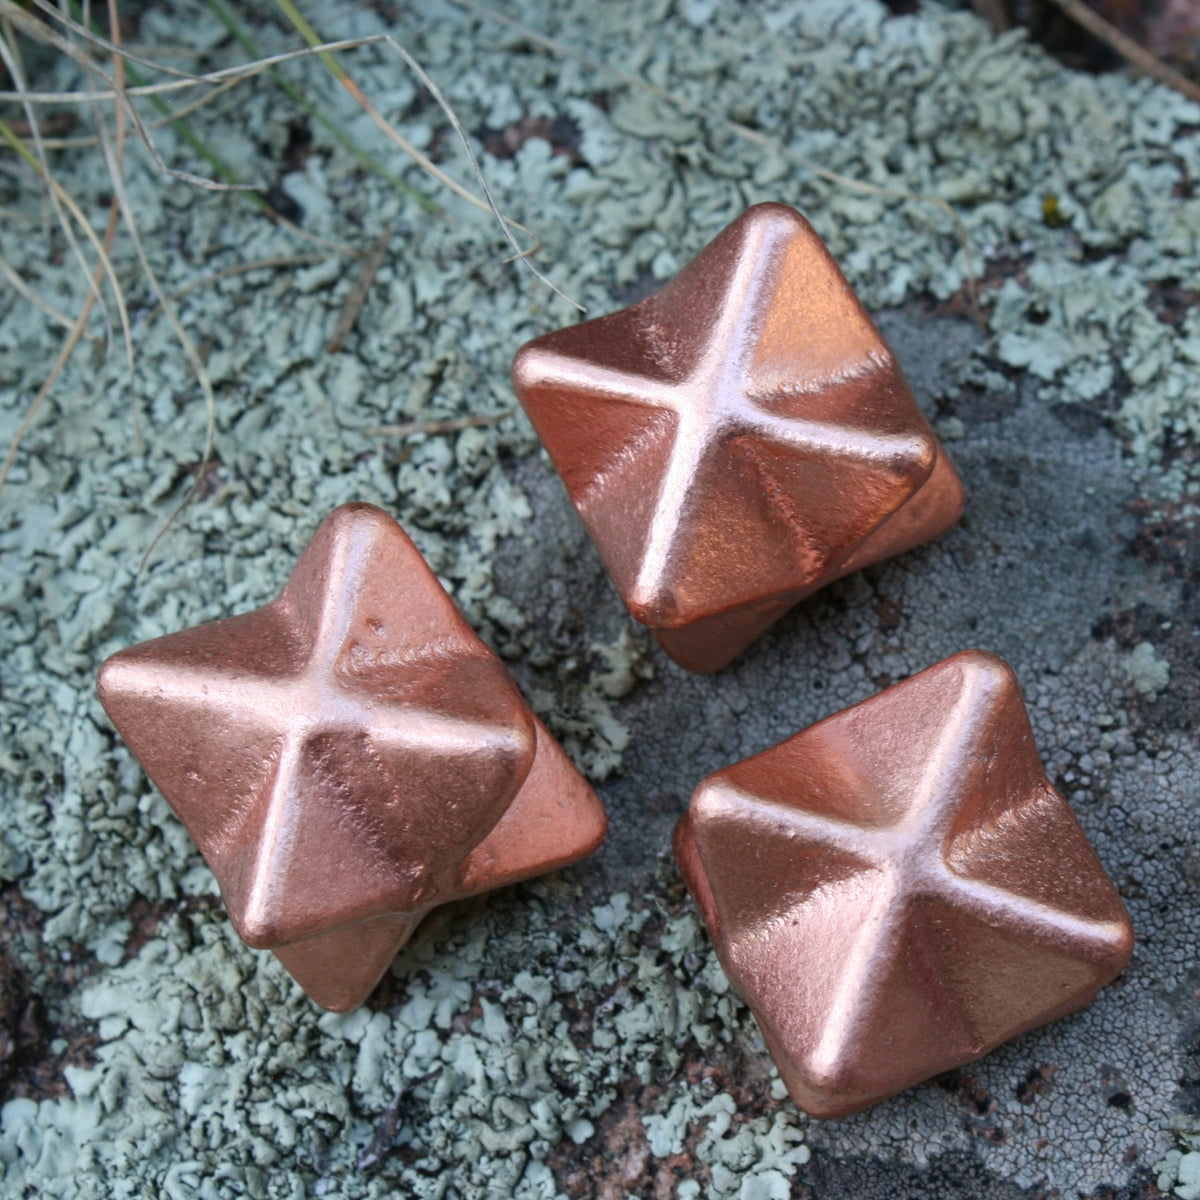 ONE Copper Merkabah from Michigan, approx.: 74 grams each